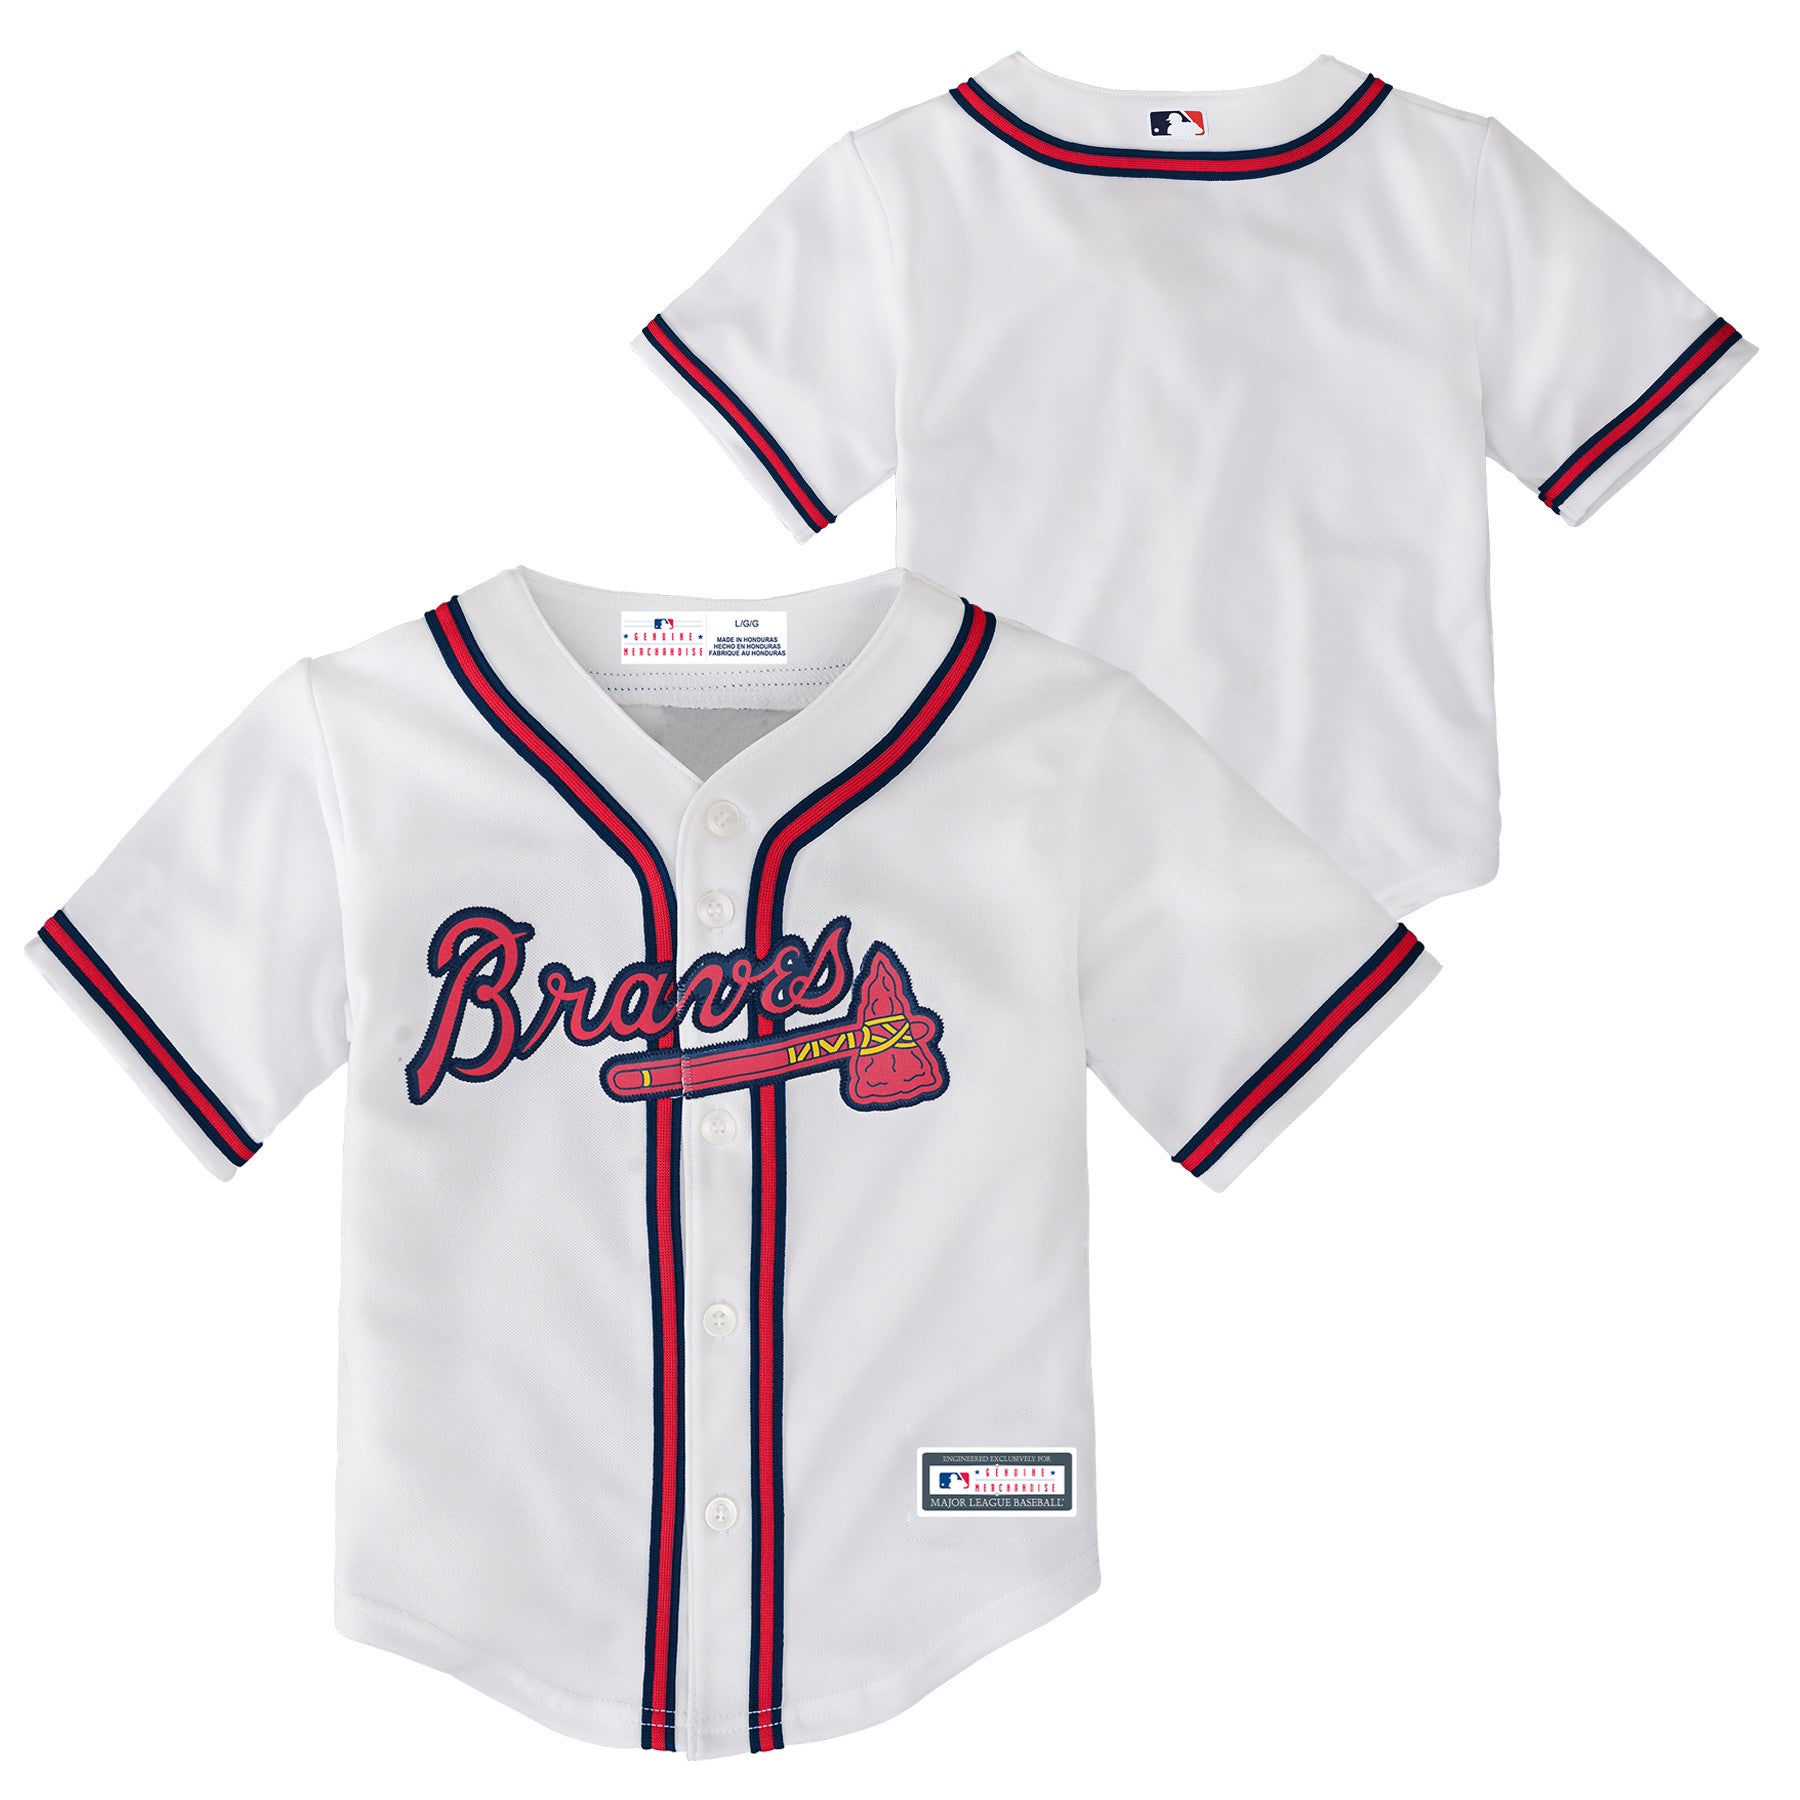 Infant Braves Jersey Online Shopping For Sports Jerseys Nba Jerseys Nfl Jerseys Nhl Jerseys Mlb Jerseys Baseball Hockey And Football Uniforms